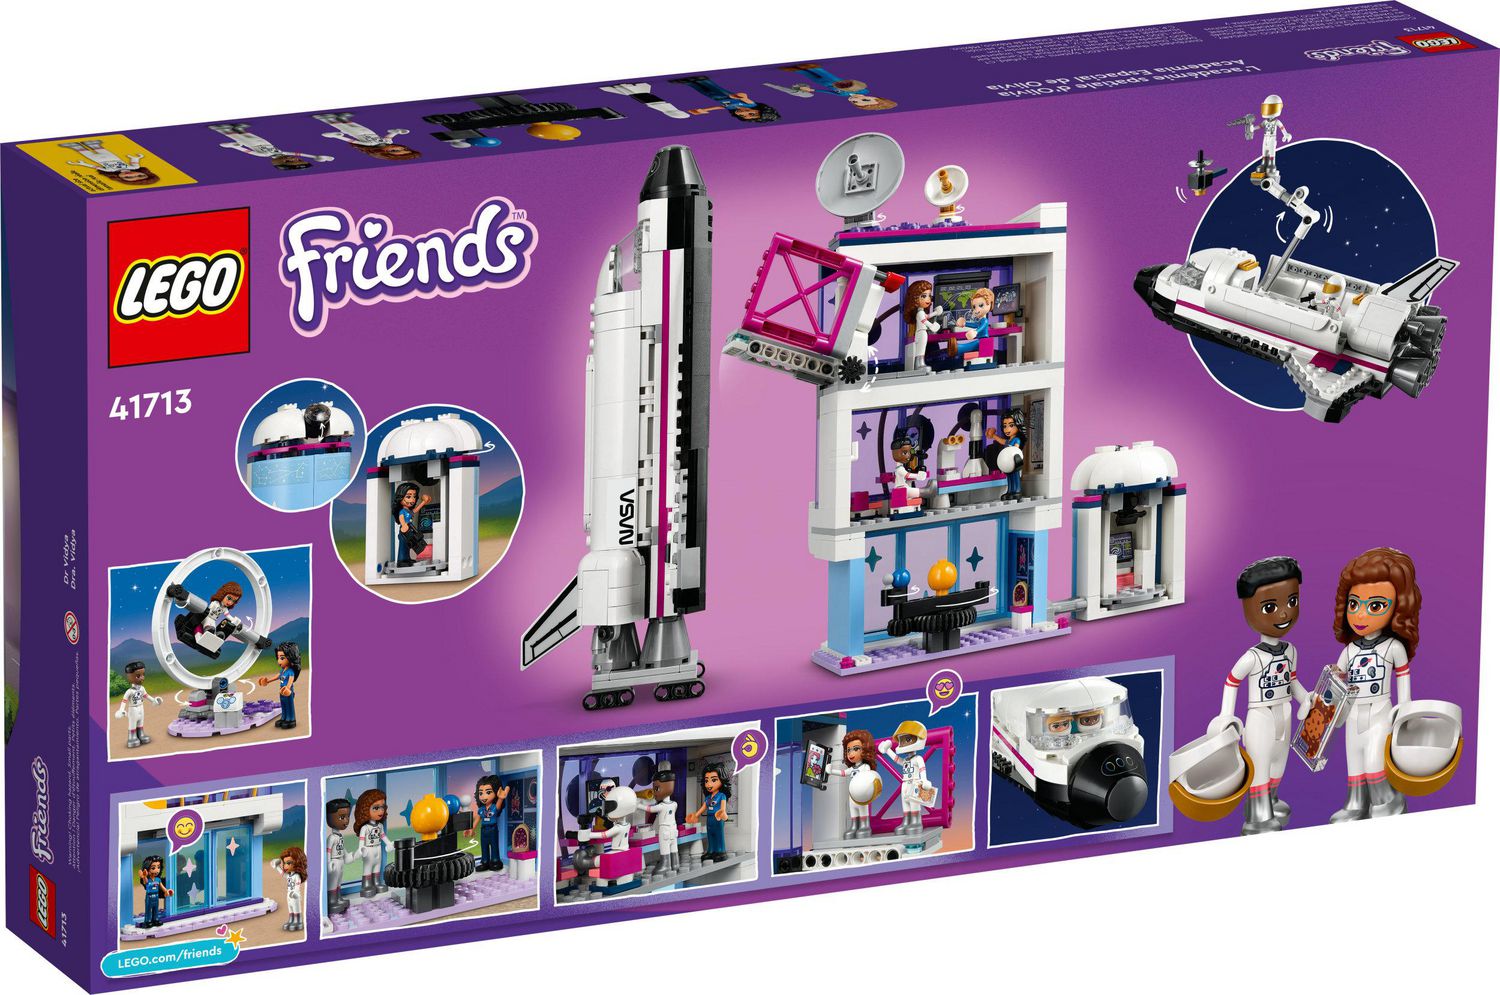 LEGO Friends Olivia's Space Academy 41713 Toy Building Kit (757 Pieces)